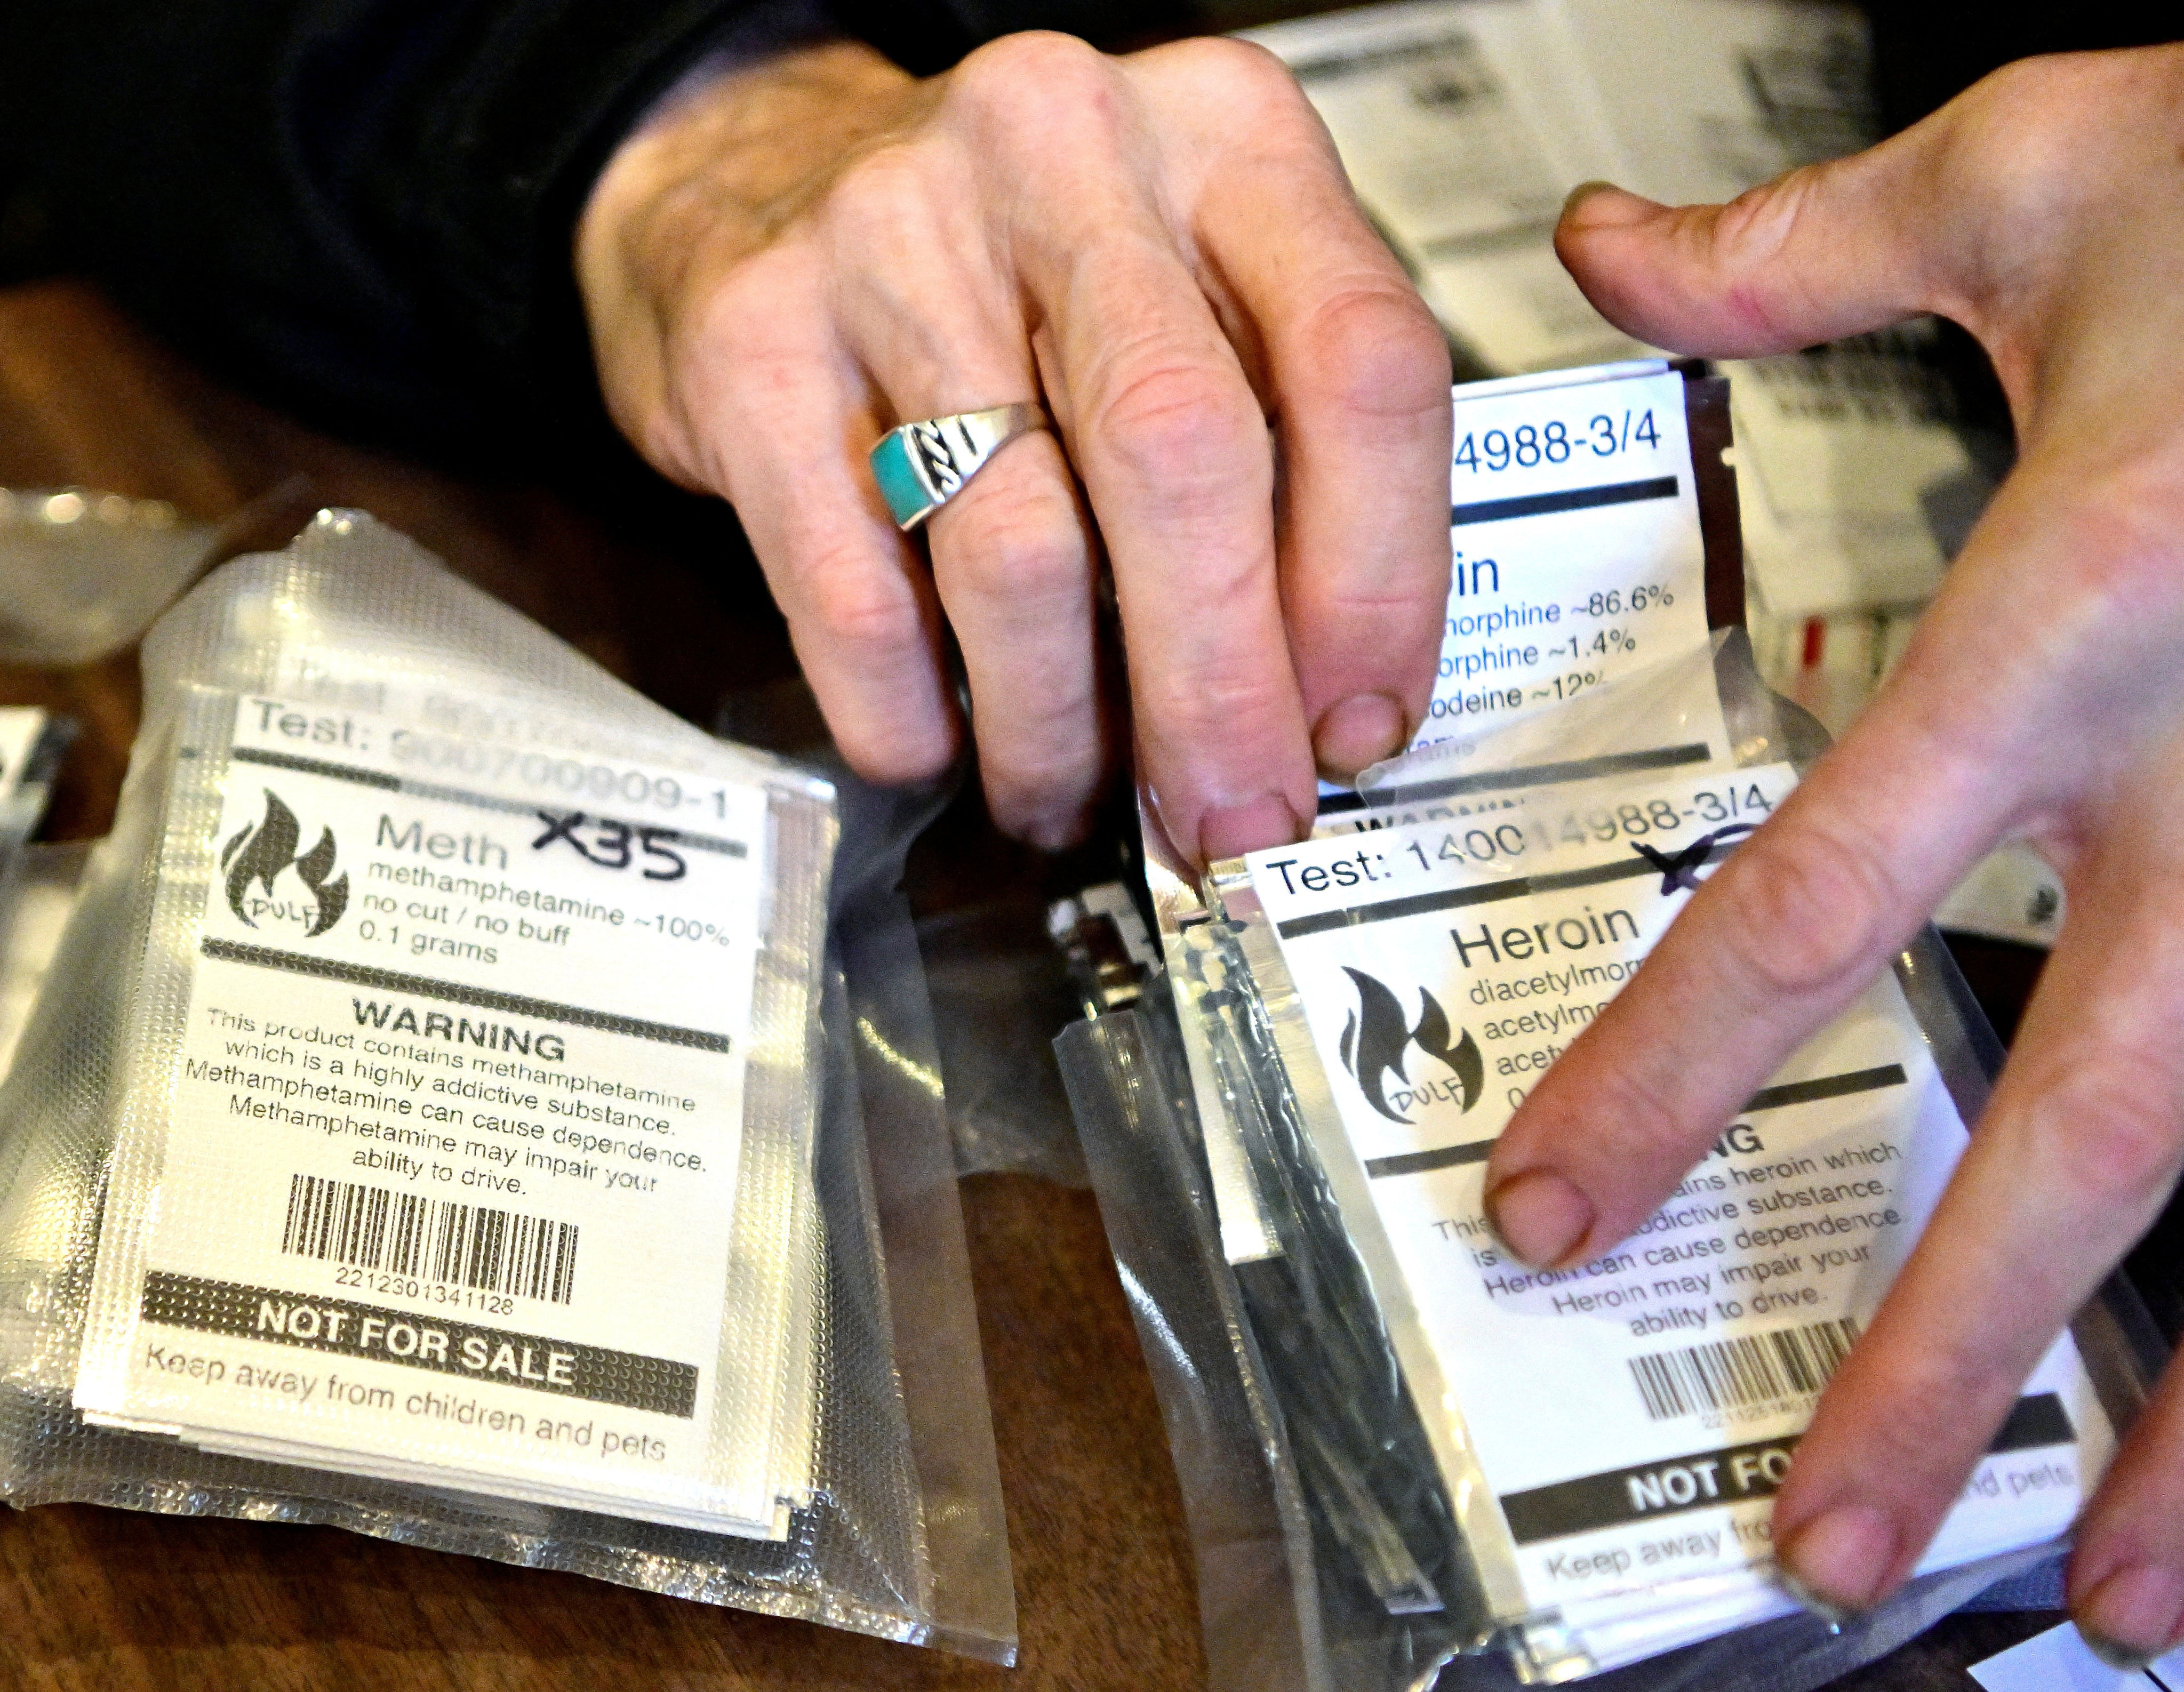 Packets of drugs tested for contaminants. British Columbia has decriminalised the possession of small amounts of cocaine, methamphetamine, MDMA and opioids like heroin, fentanyl and morphine. Phot